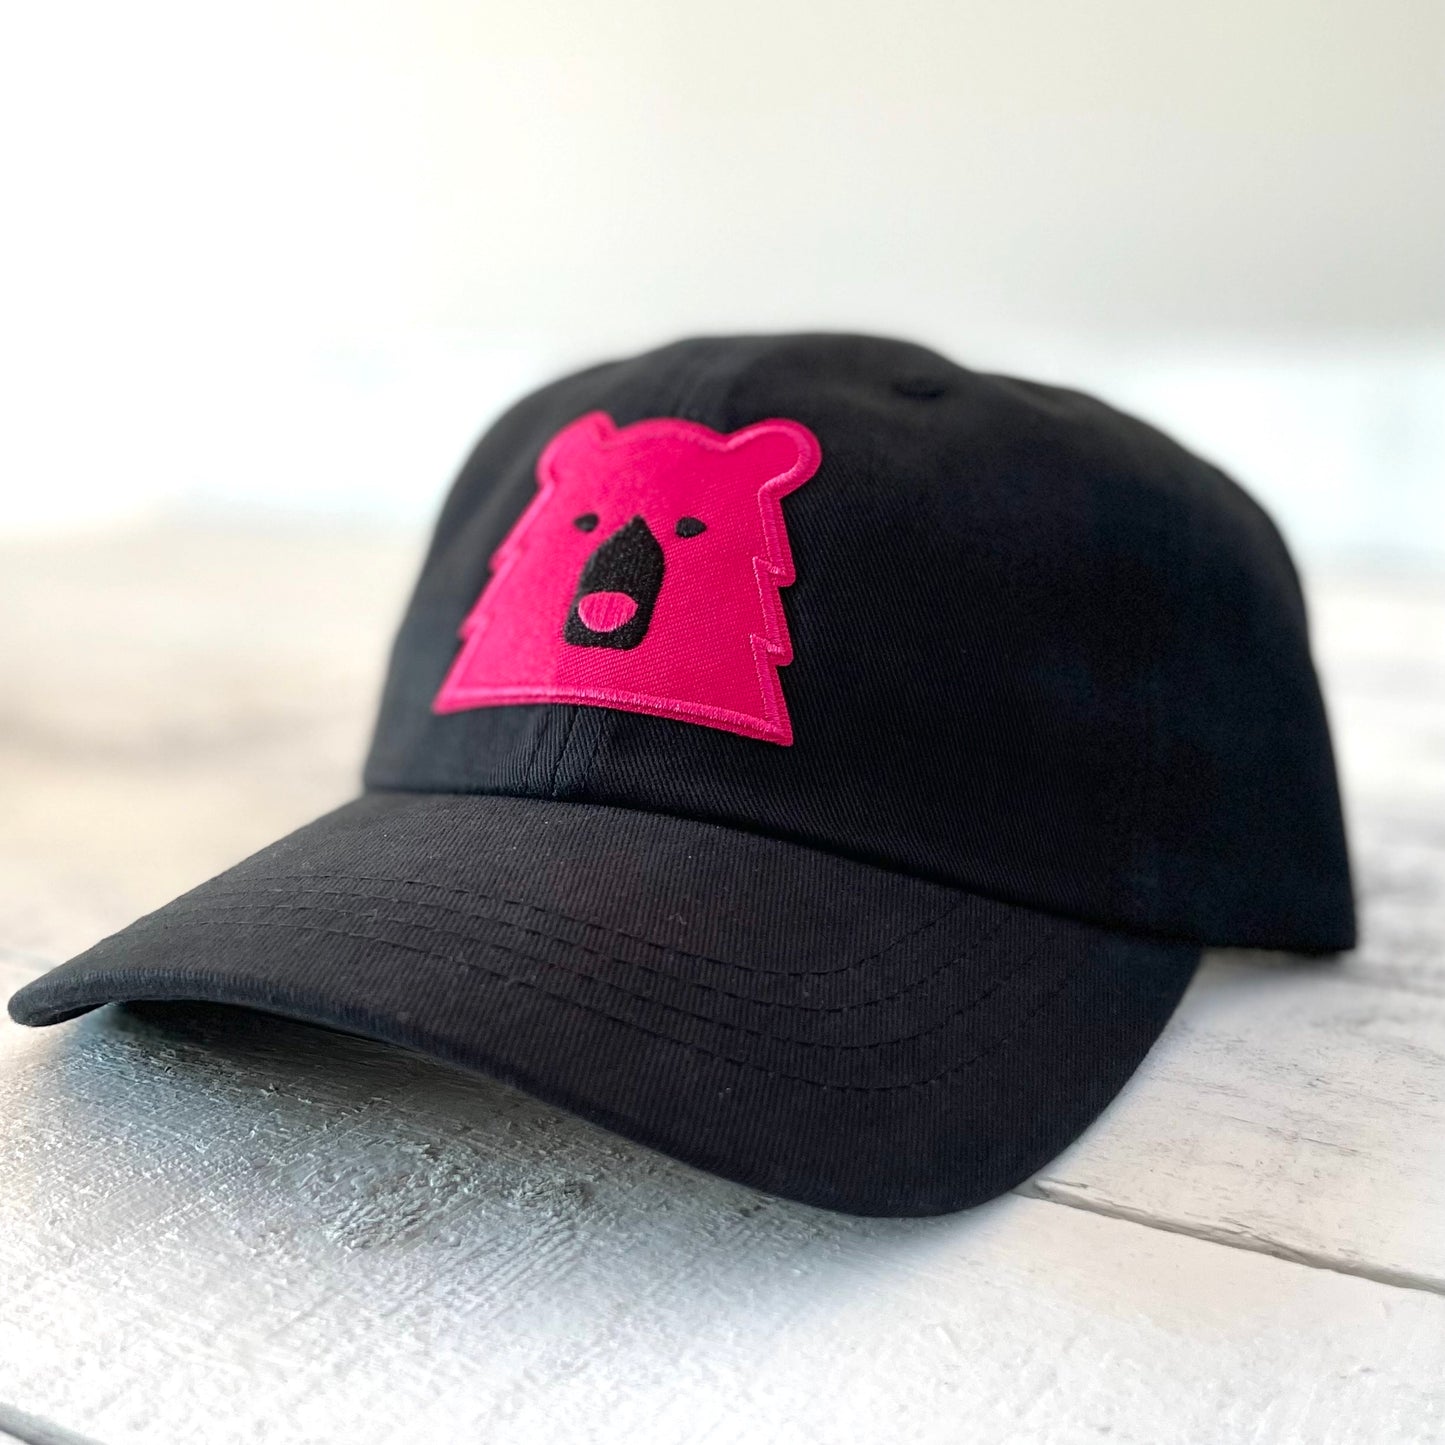 Camp Hat - Black with Hot Pink Bear